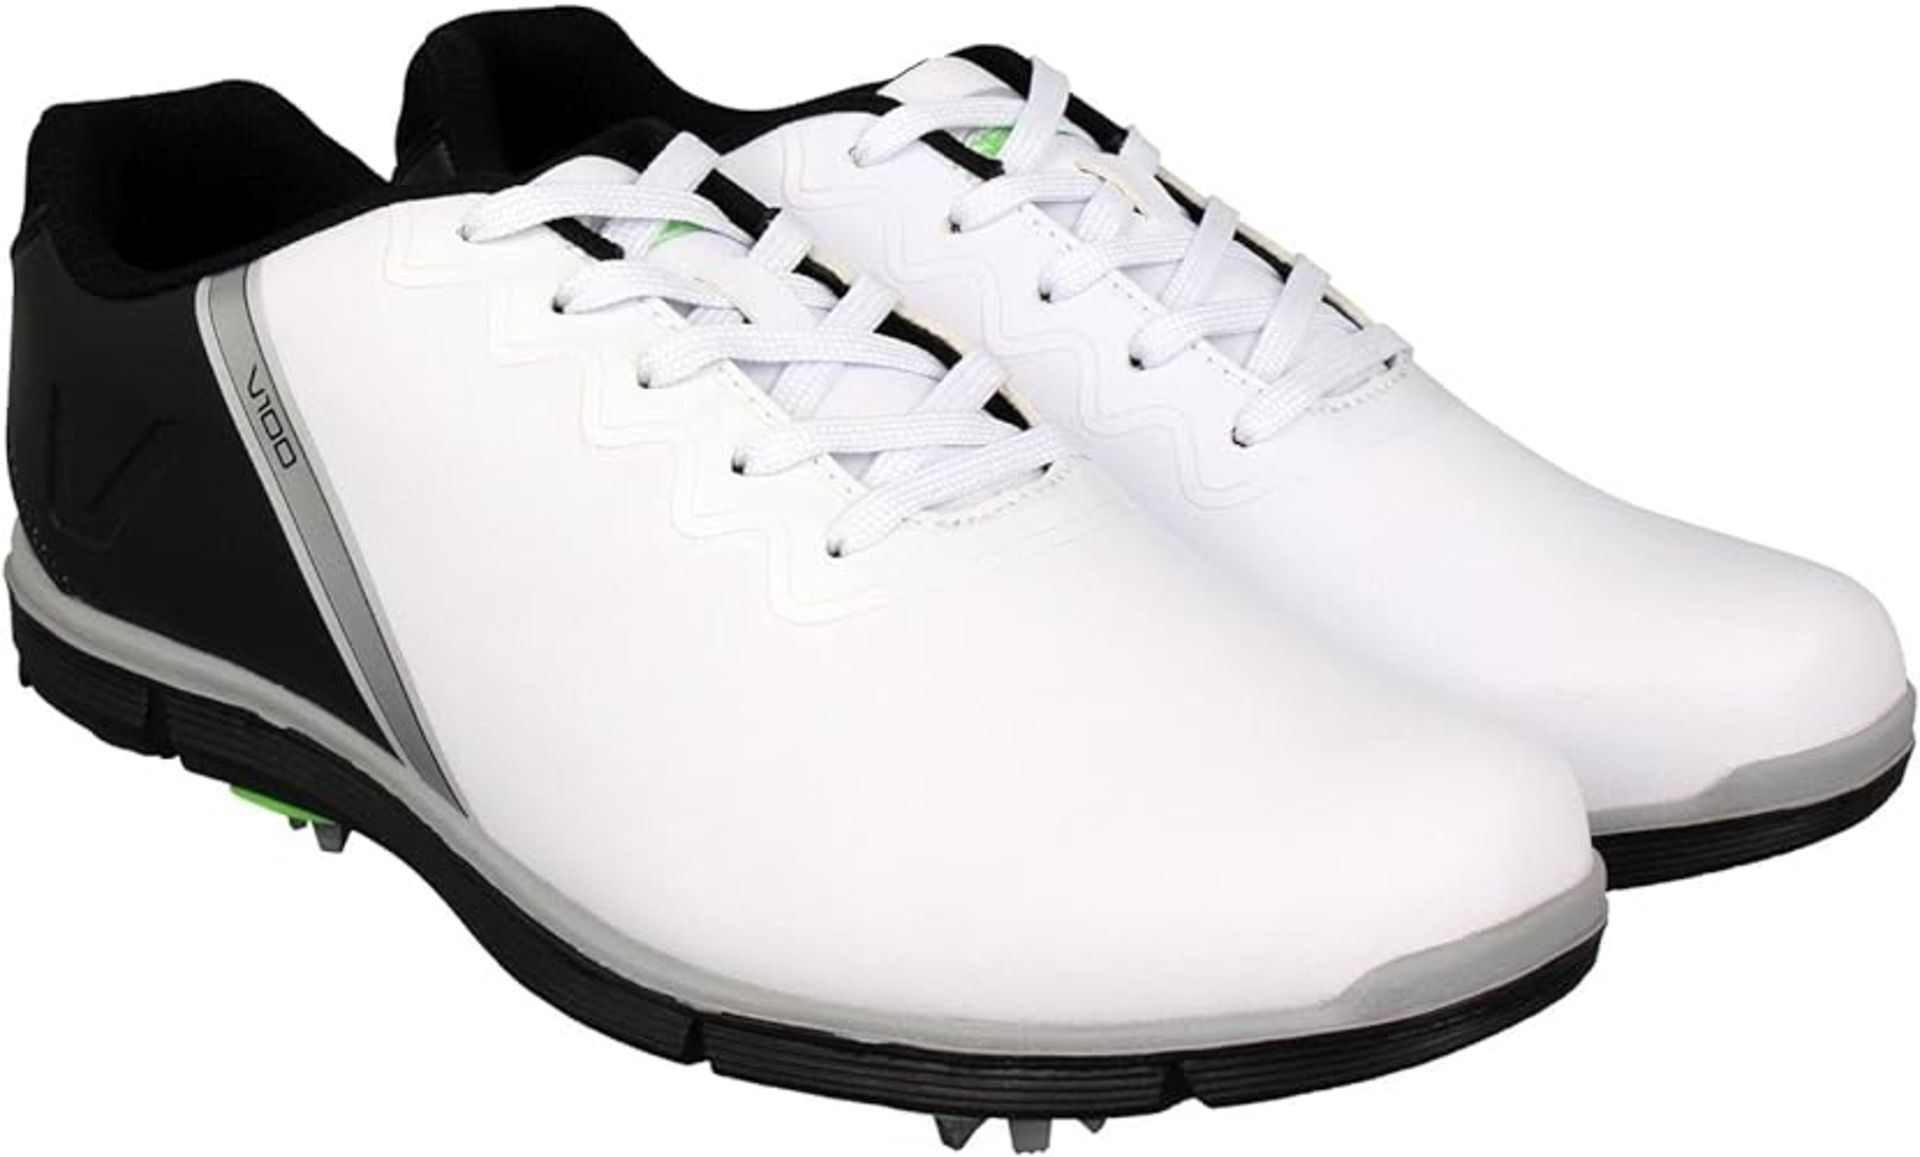 2 X BRAND NEW PAIRS OF SLAZENGER V100 PROFESSIONAL GOLF SHOES SIZE 10 RRP £89 EACH S1RA - Image 3 of 3